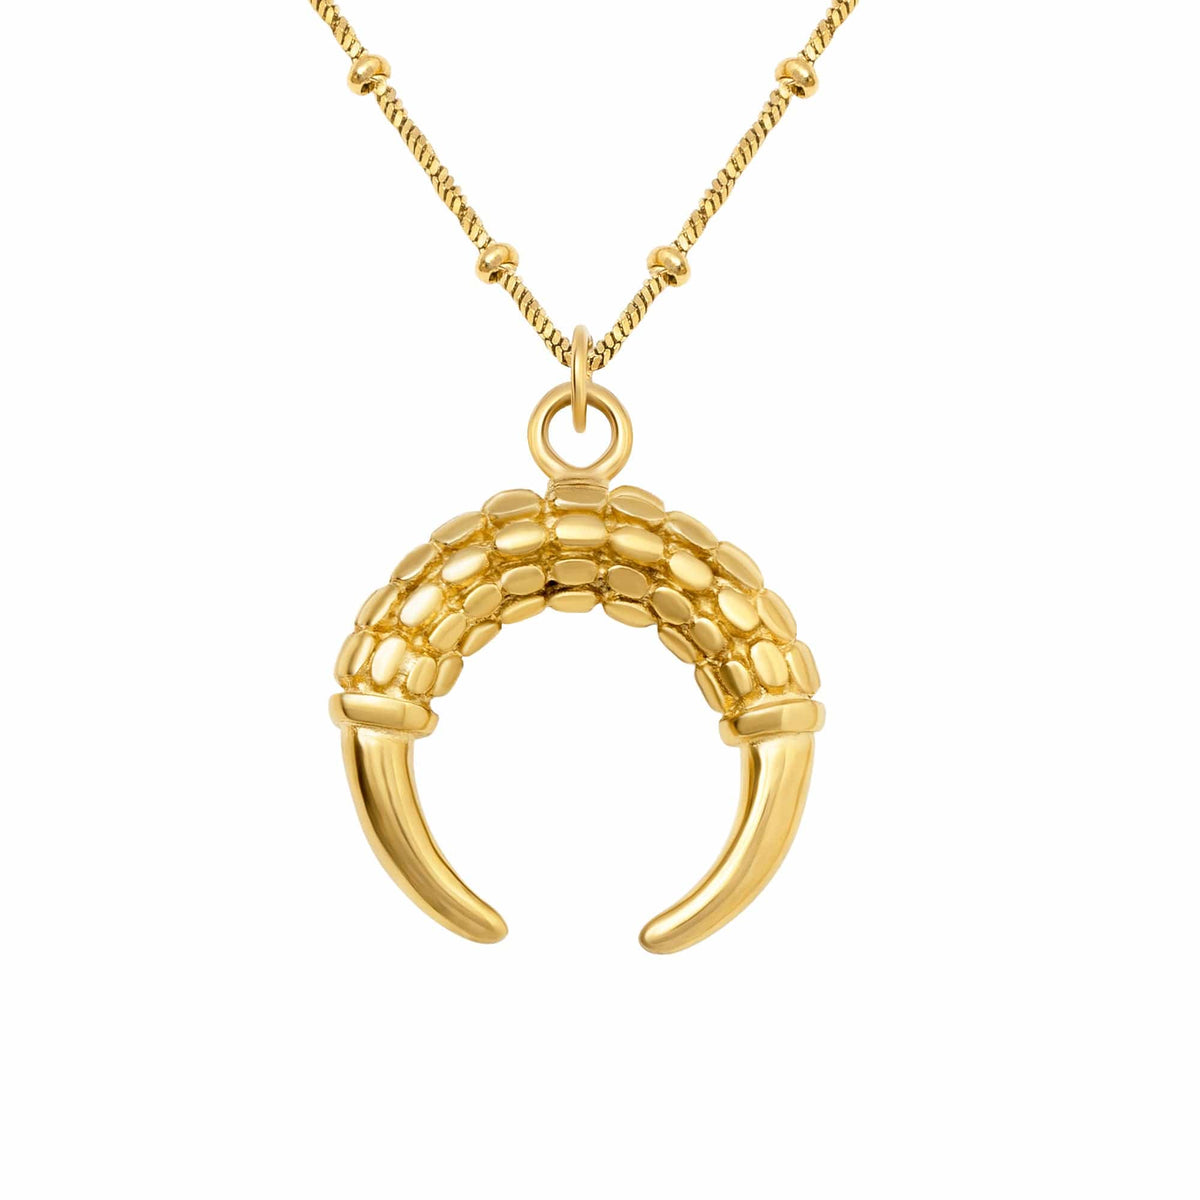 BohoMoon Stainless Steel Leia Horn Necklace Gold